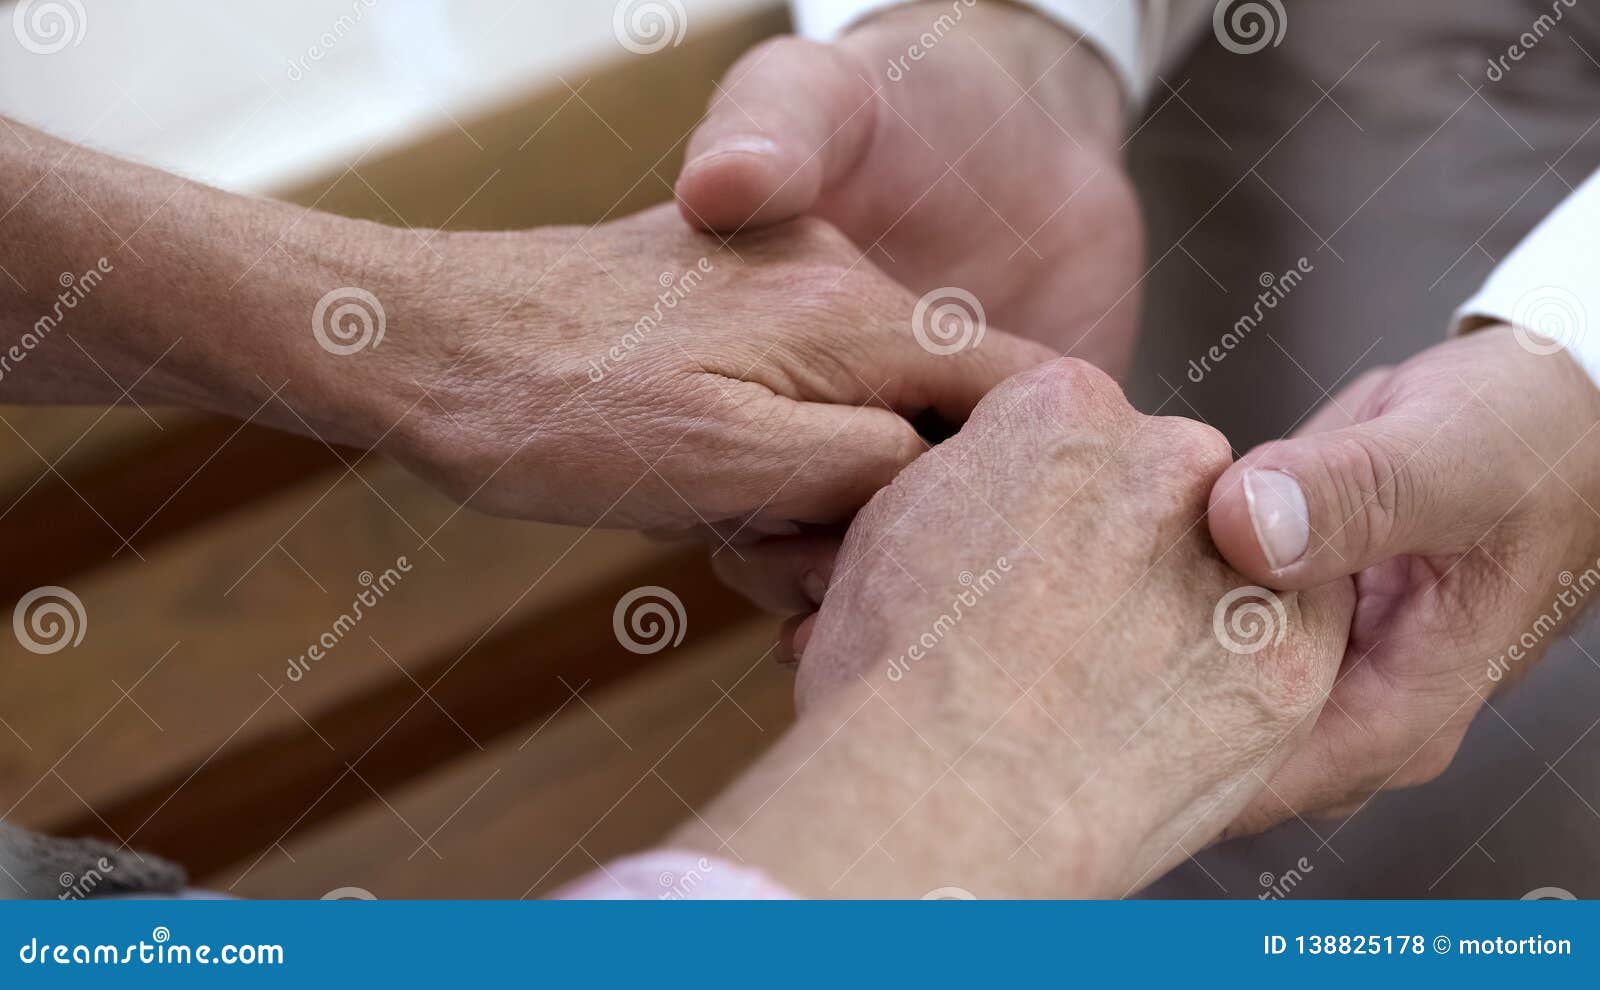 true love through hard times, man holding old female hands, support and care